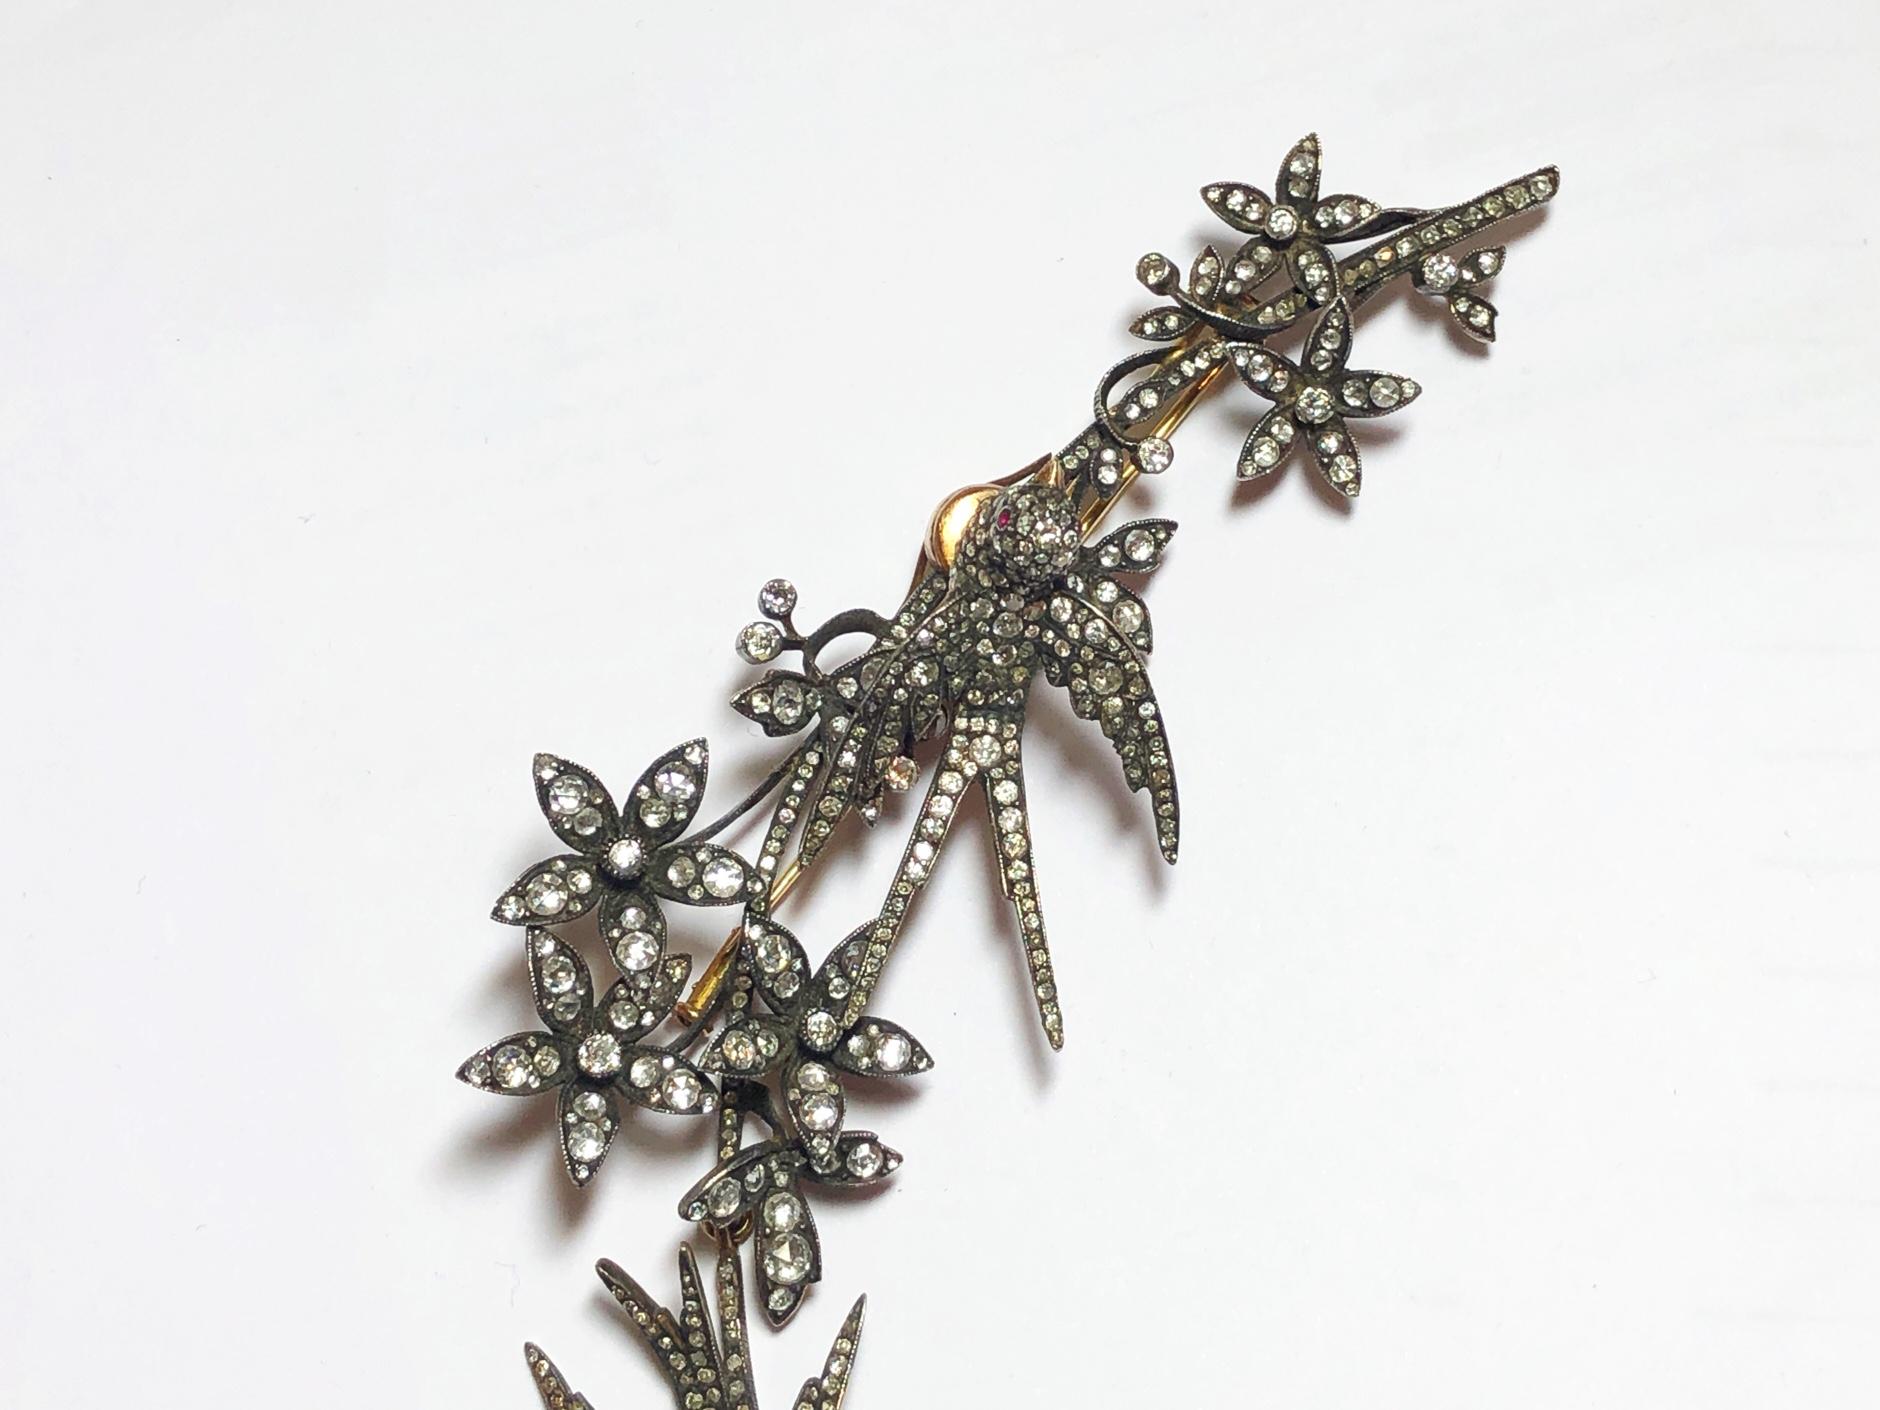 Silver-upon-gold, long trembling bird and flower brooch, set with 14.66ct of old-cut, rose-cut and round brilliant-cut diamonds.